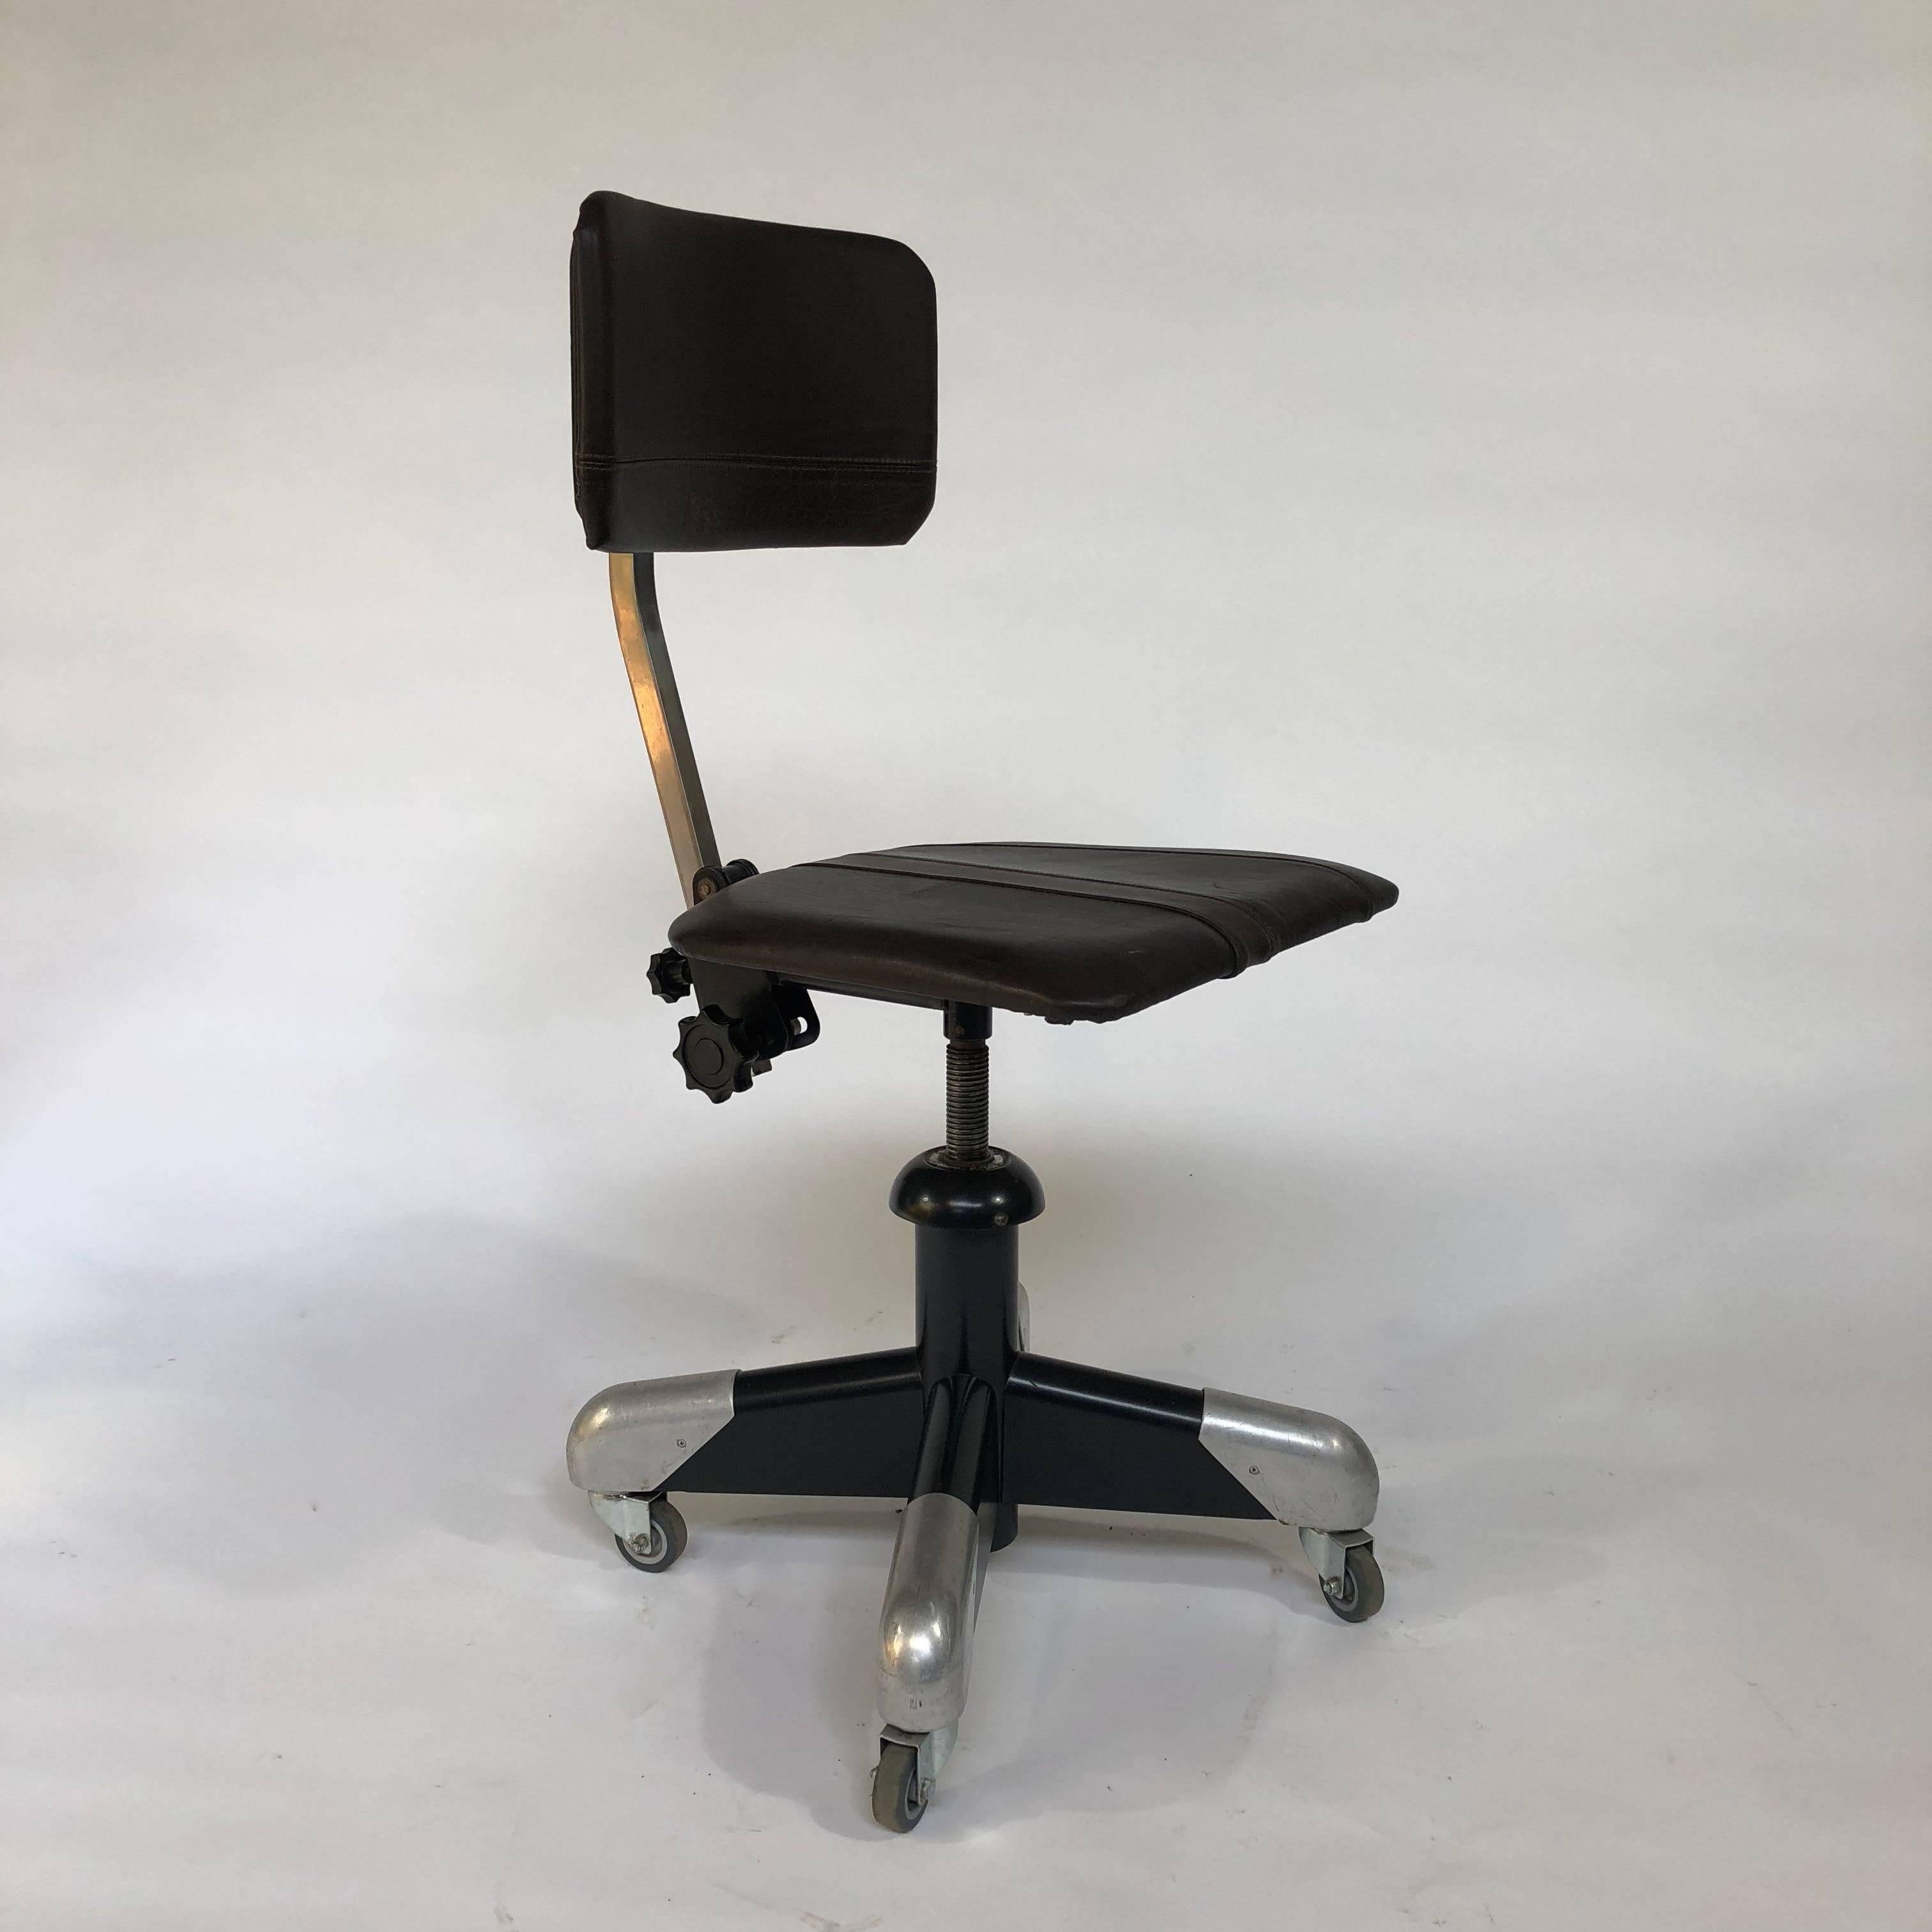 Newly upholstered with vintage leather makes this Design Classic by Gispen a beautiful addition to your office, working space or home.
The chair was designed by CH Hoffmann in 1953 for Gispen.
Swivel chair adjustable in height.